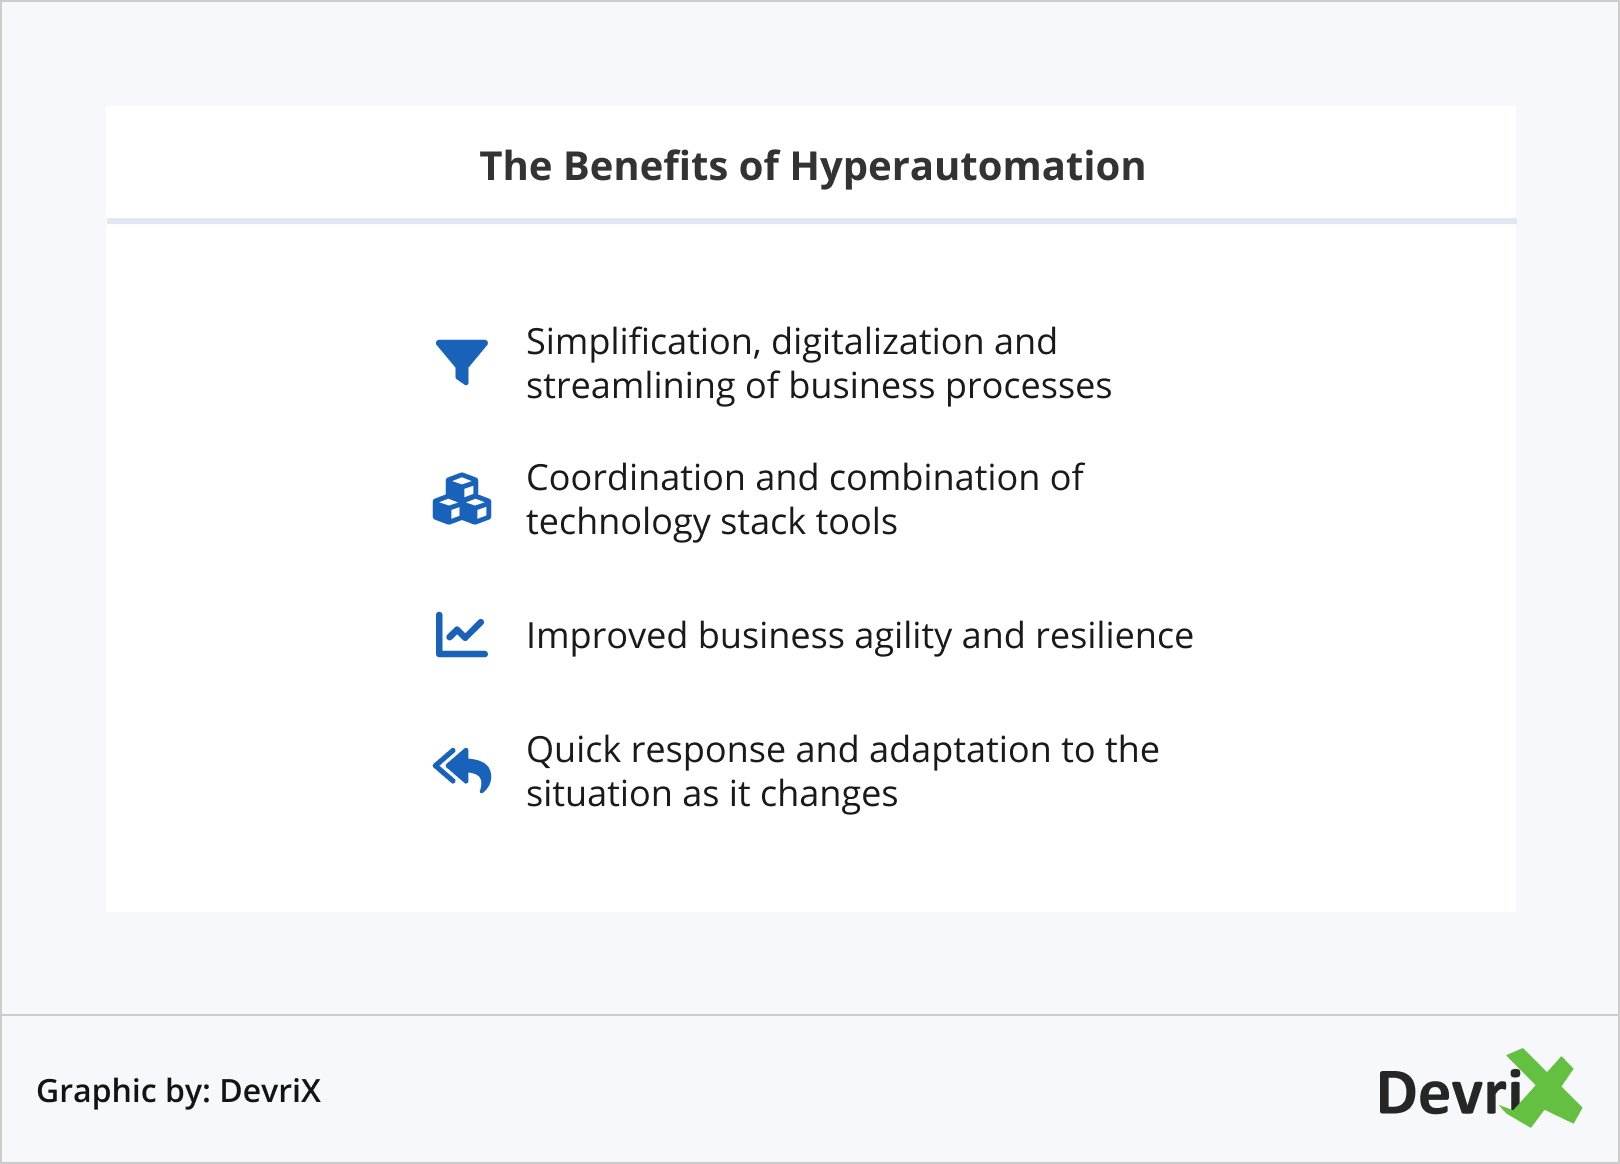 The Benefits of Hyperautomation